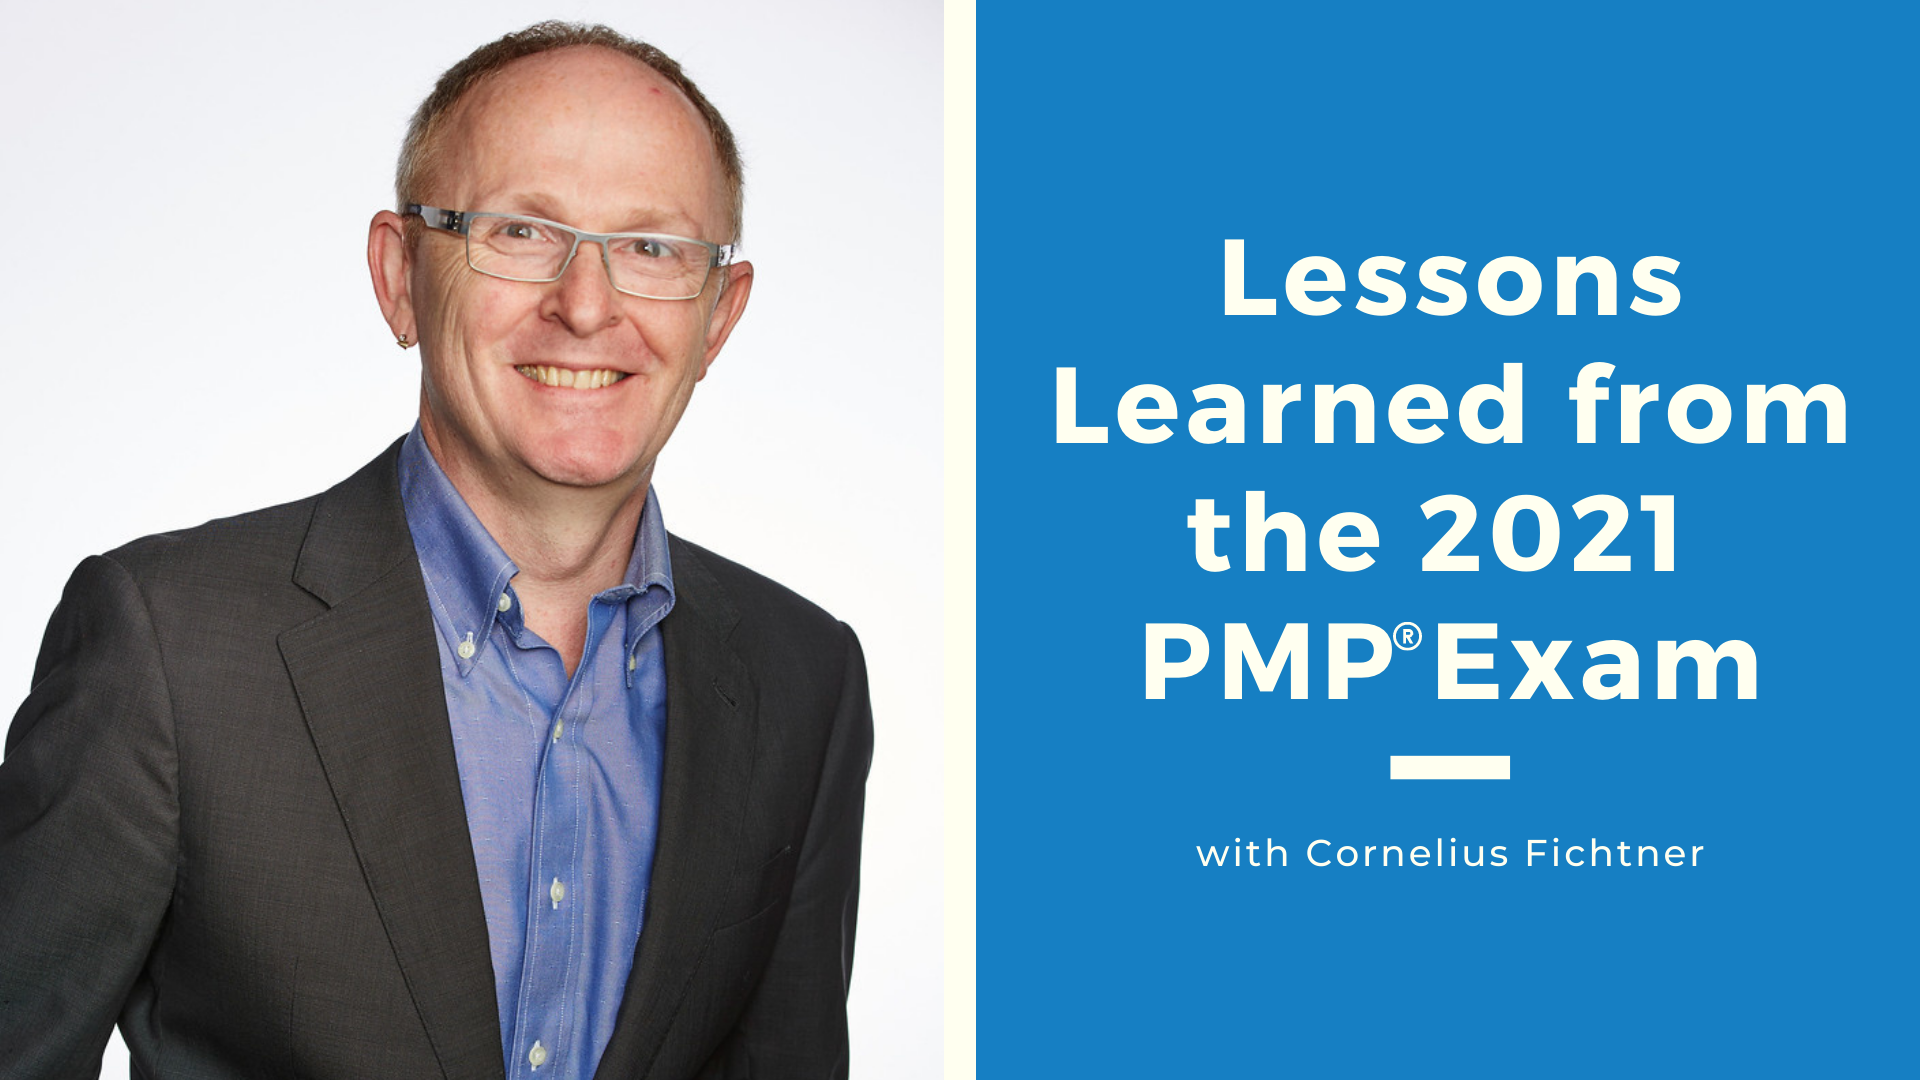 Top Lessons Learned from the 2021 PMP® Exam